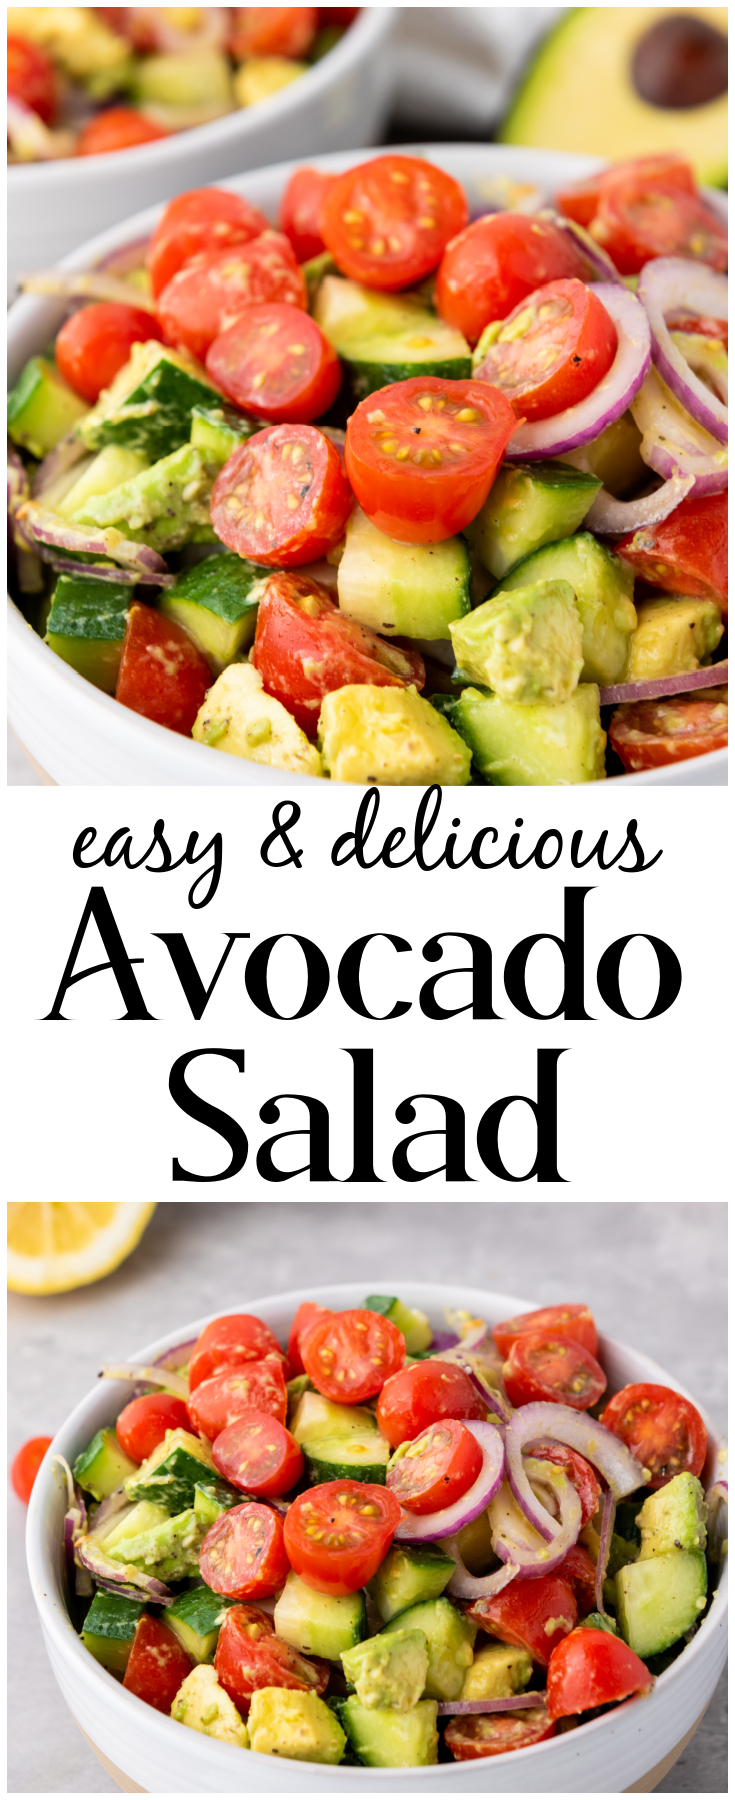 Avocado Salad- an equally beautiful and delicious treat to welcome the hot summer weather, perfect to serve as a side or as a light dinner meal that's healthy and easy! #avocado #tomato #healthy #salad #summer #cucumber 